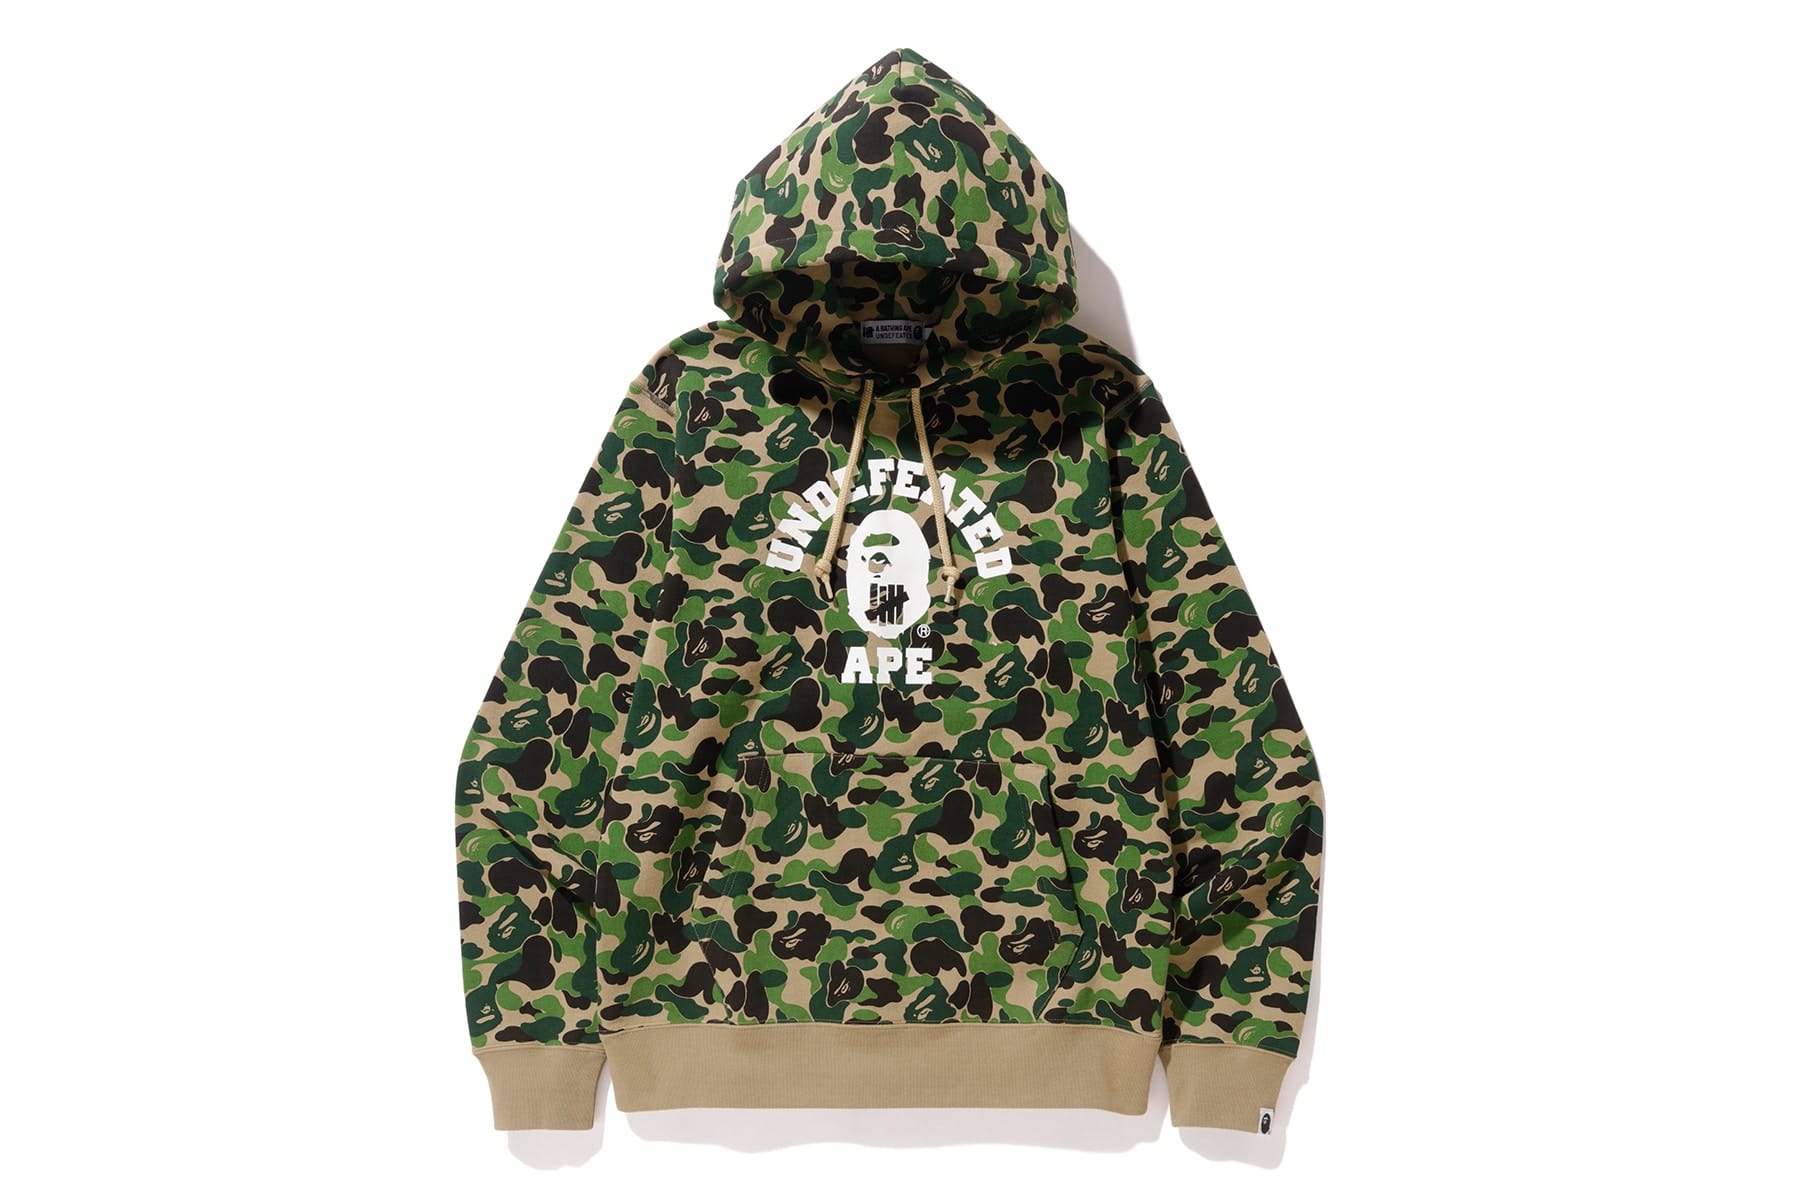 UNDEFEATED x BAPE Spring 2018 Collaboration | Hypebeast